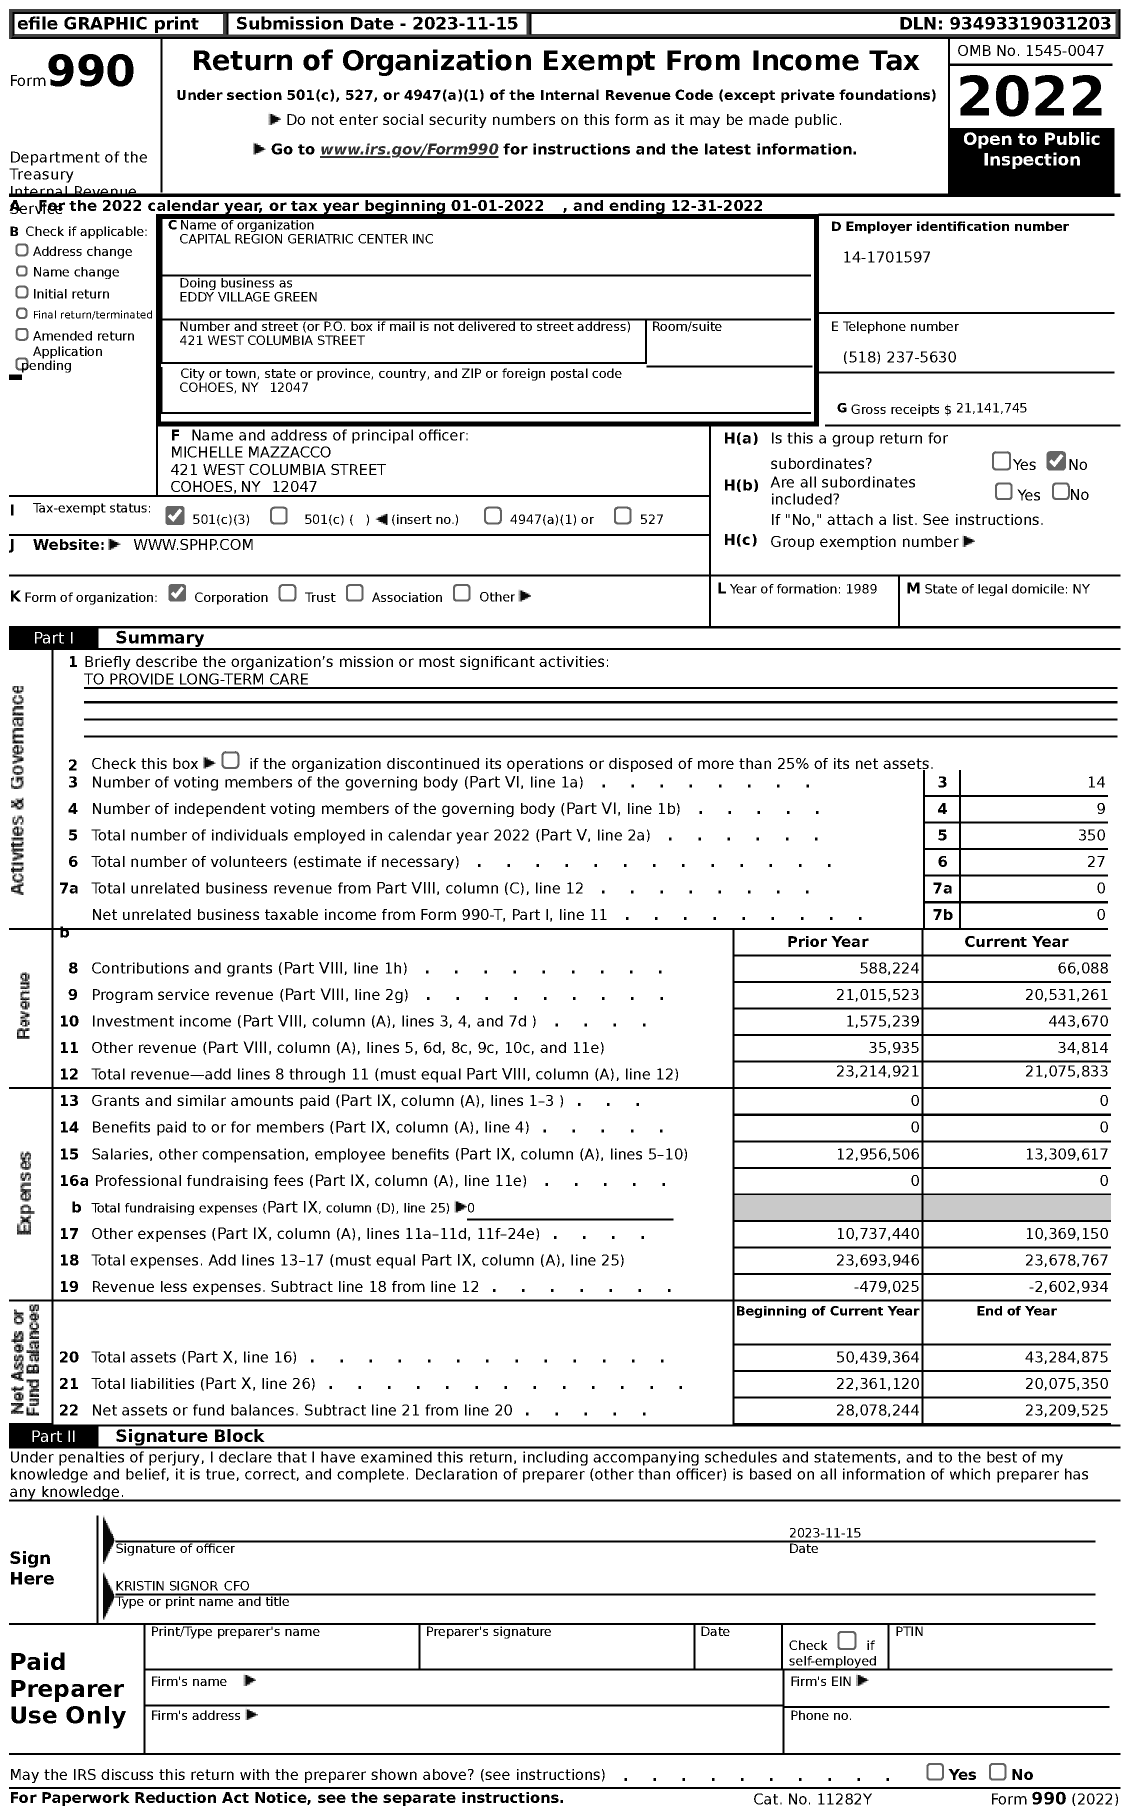 Image of first page of 2022 Form 990 for Eddy Village Green